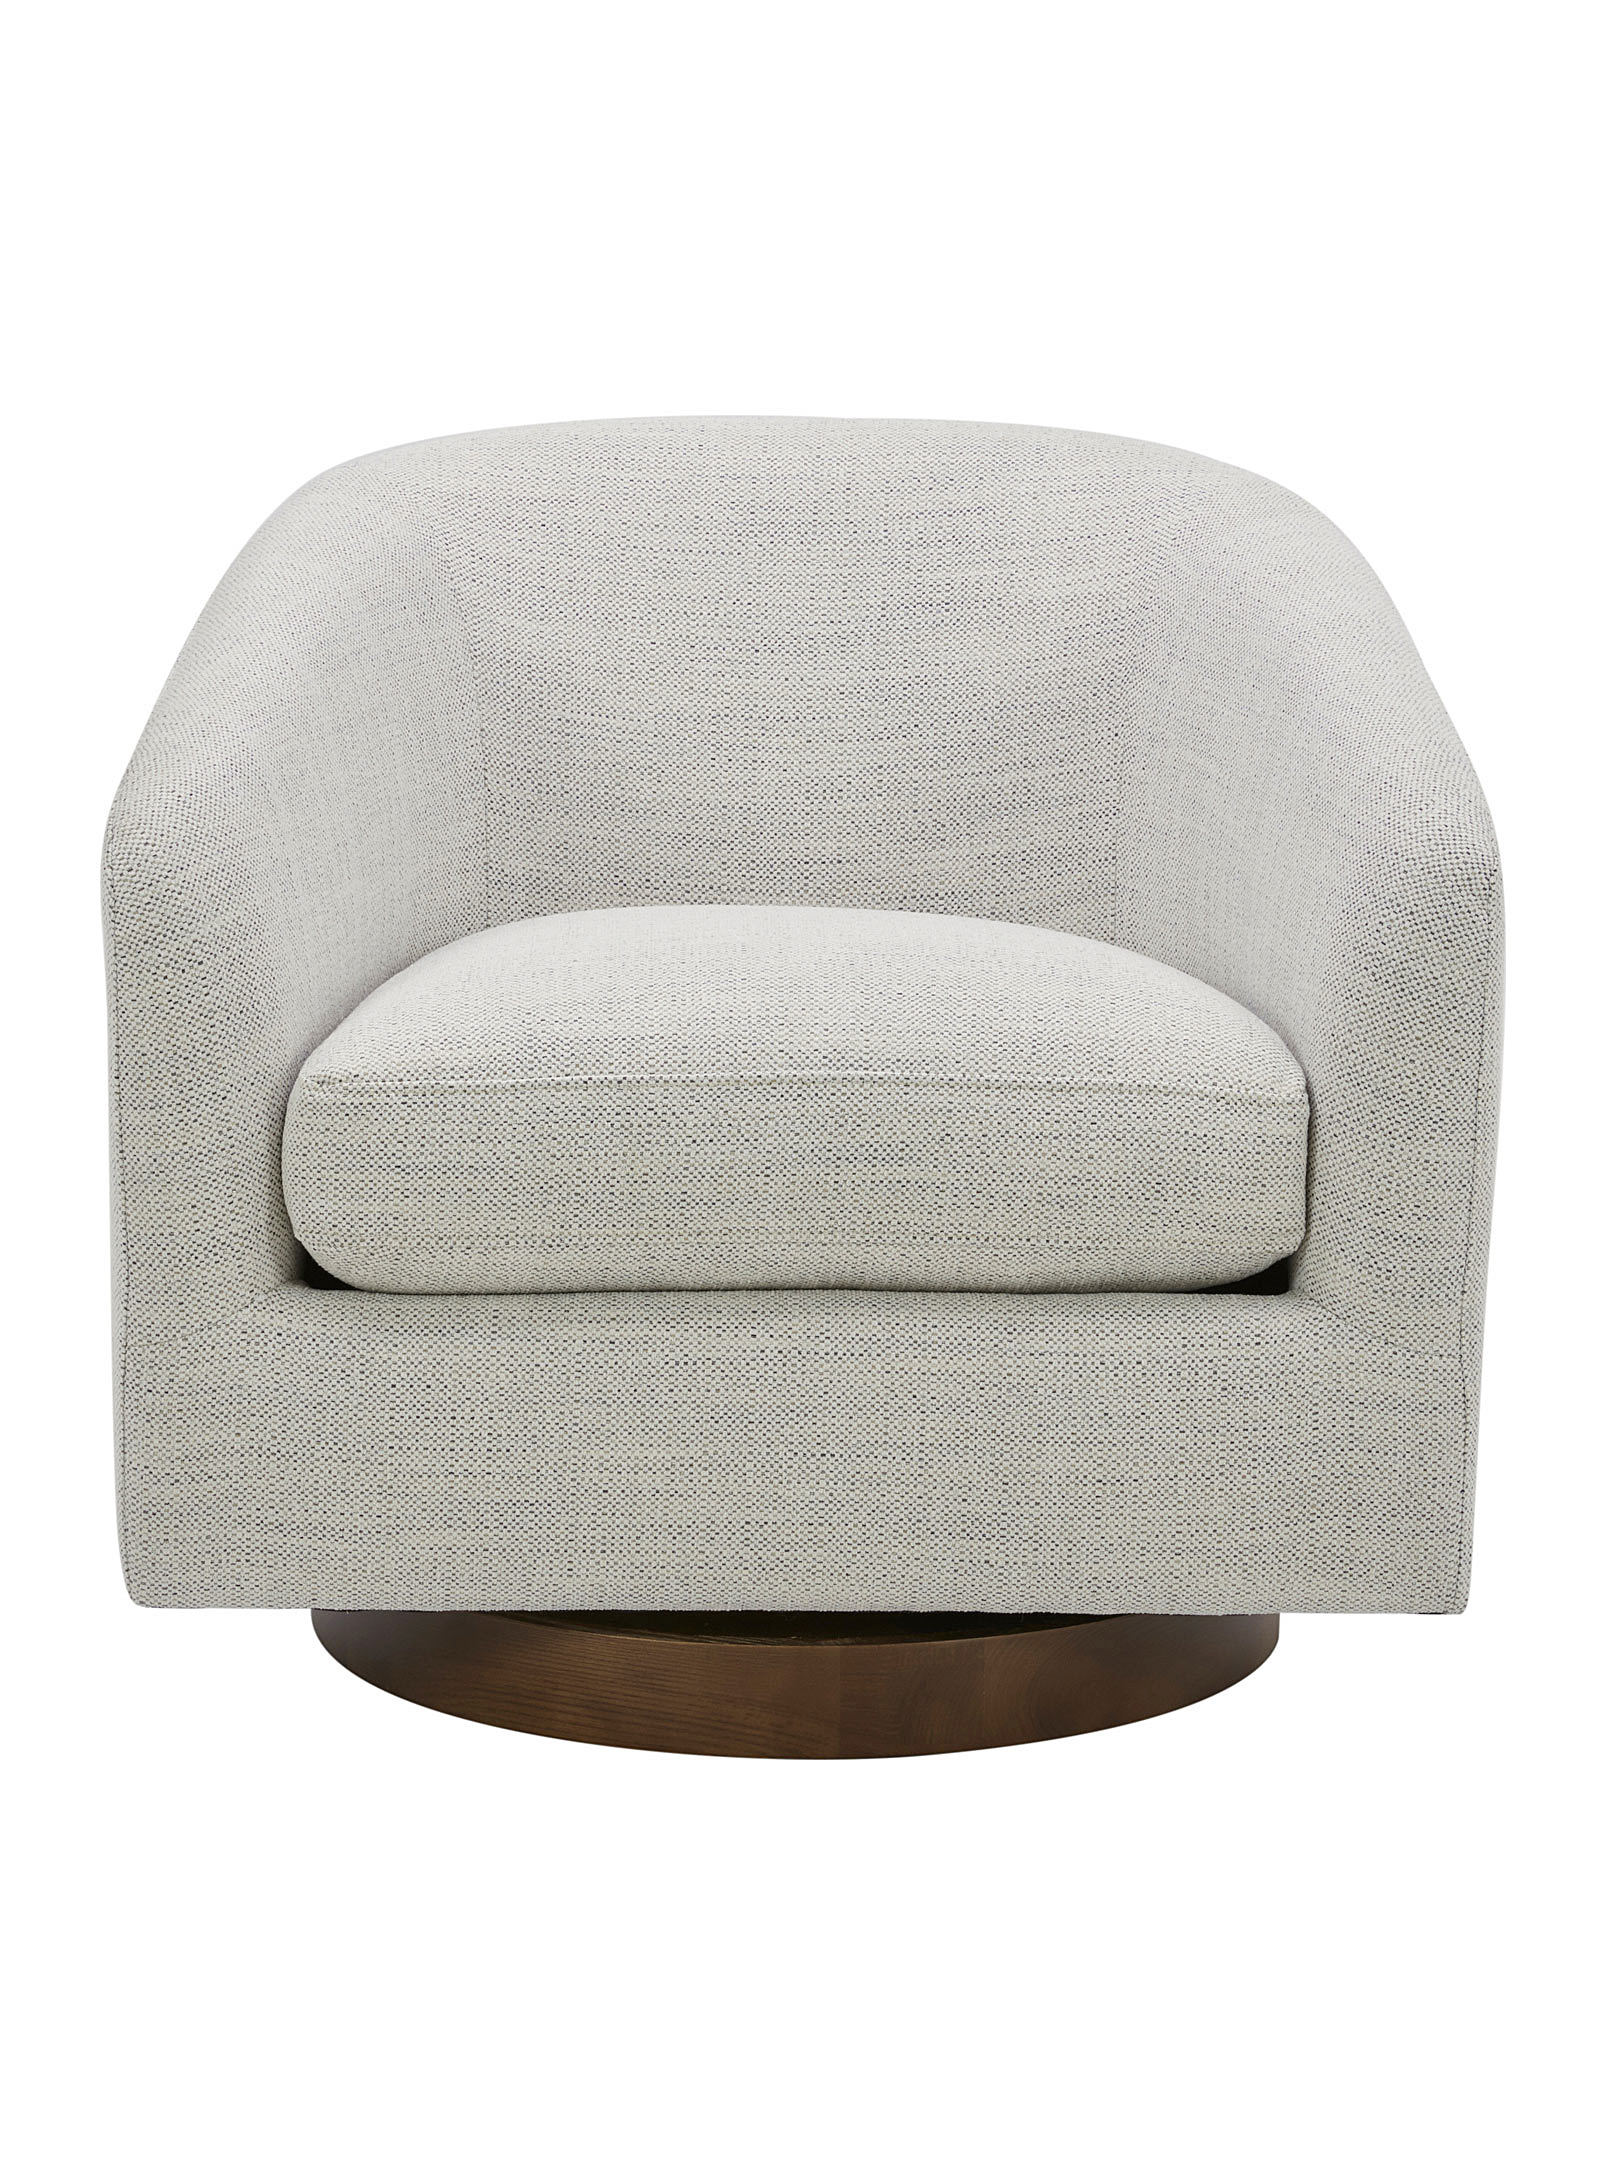 Moe's Home Collection - Oscy pivoting accent chair